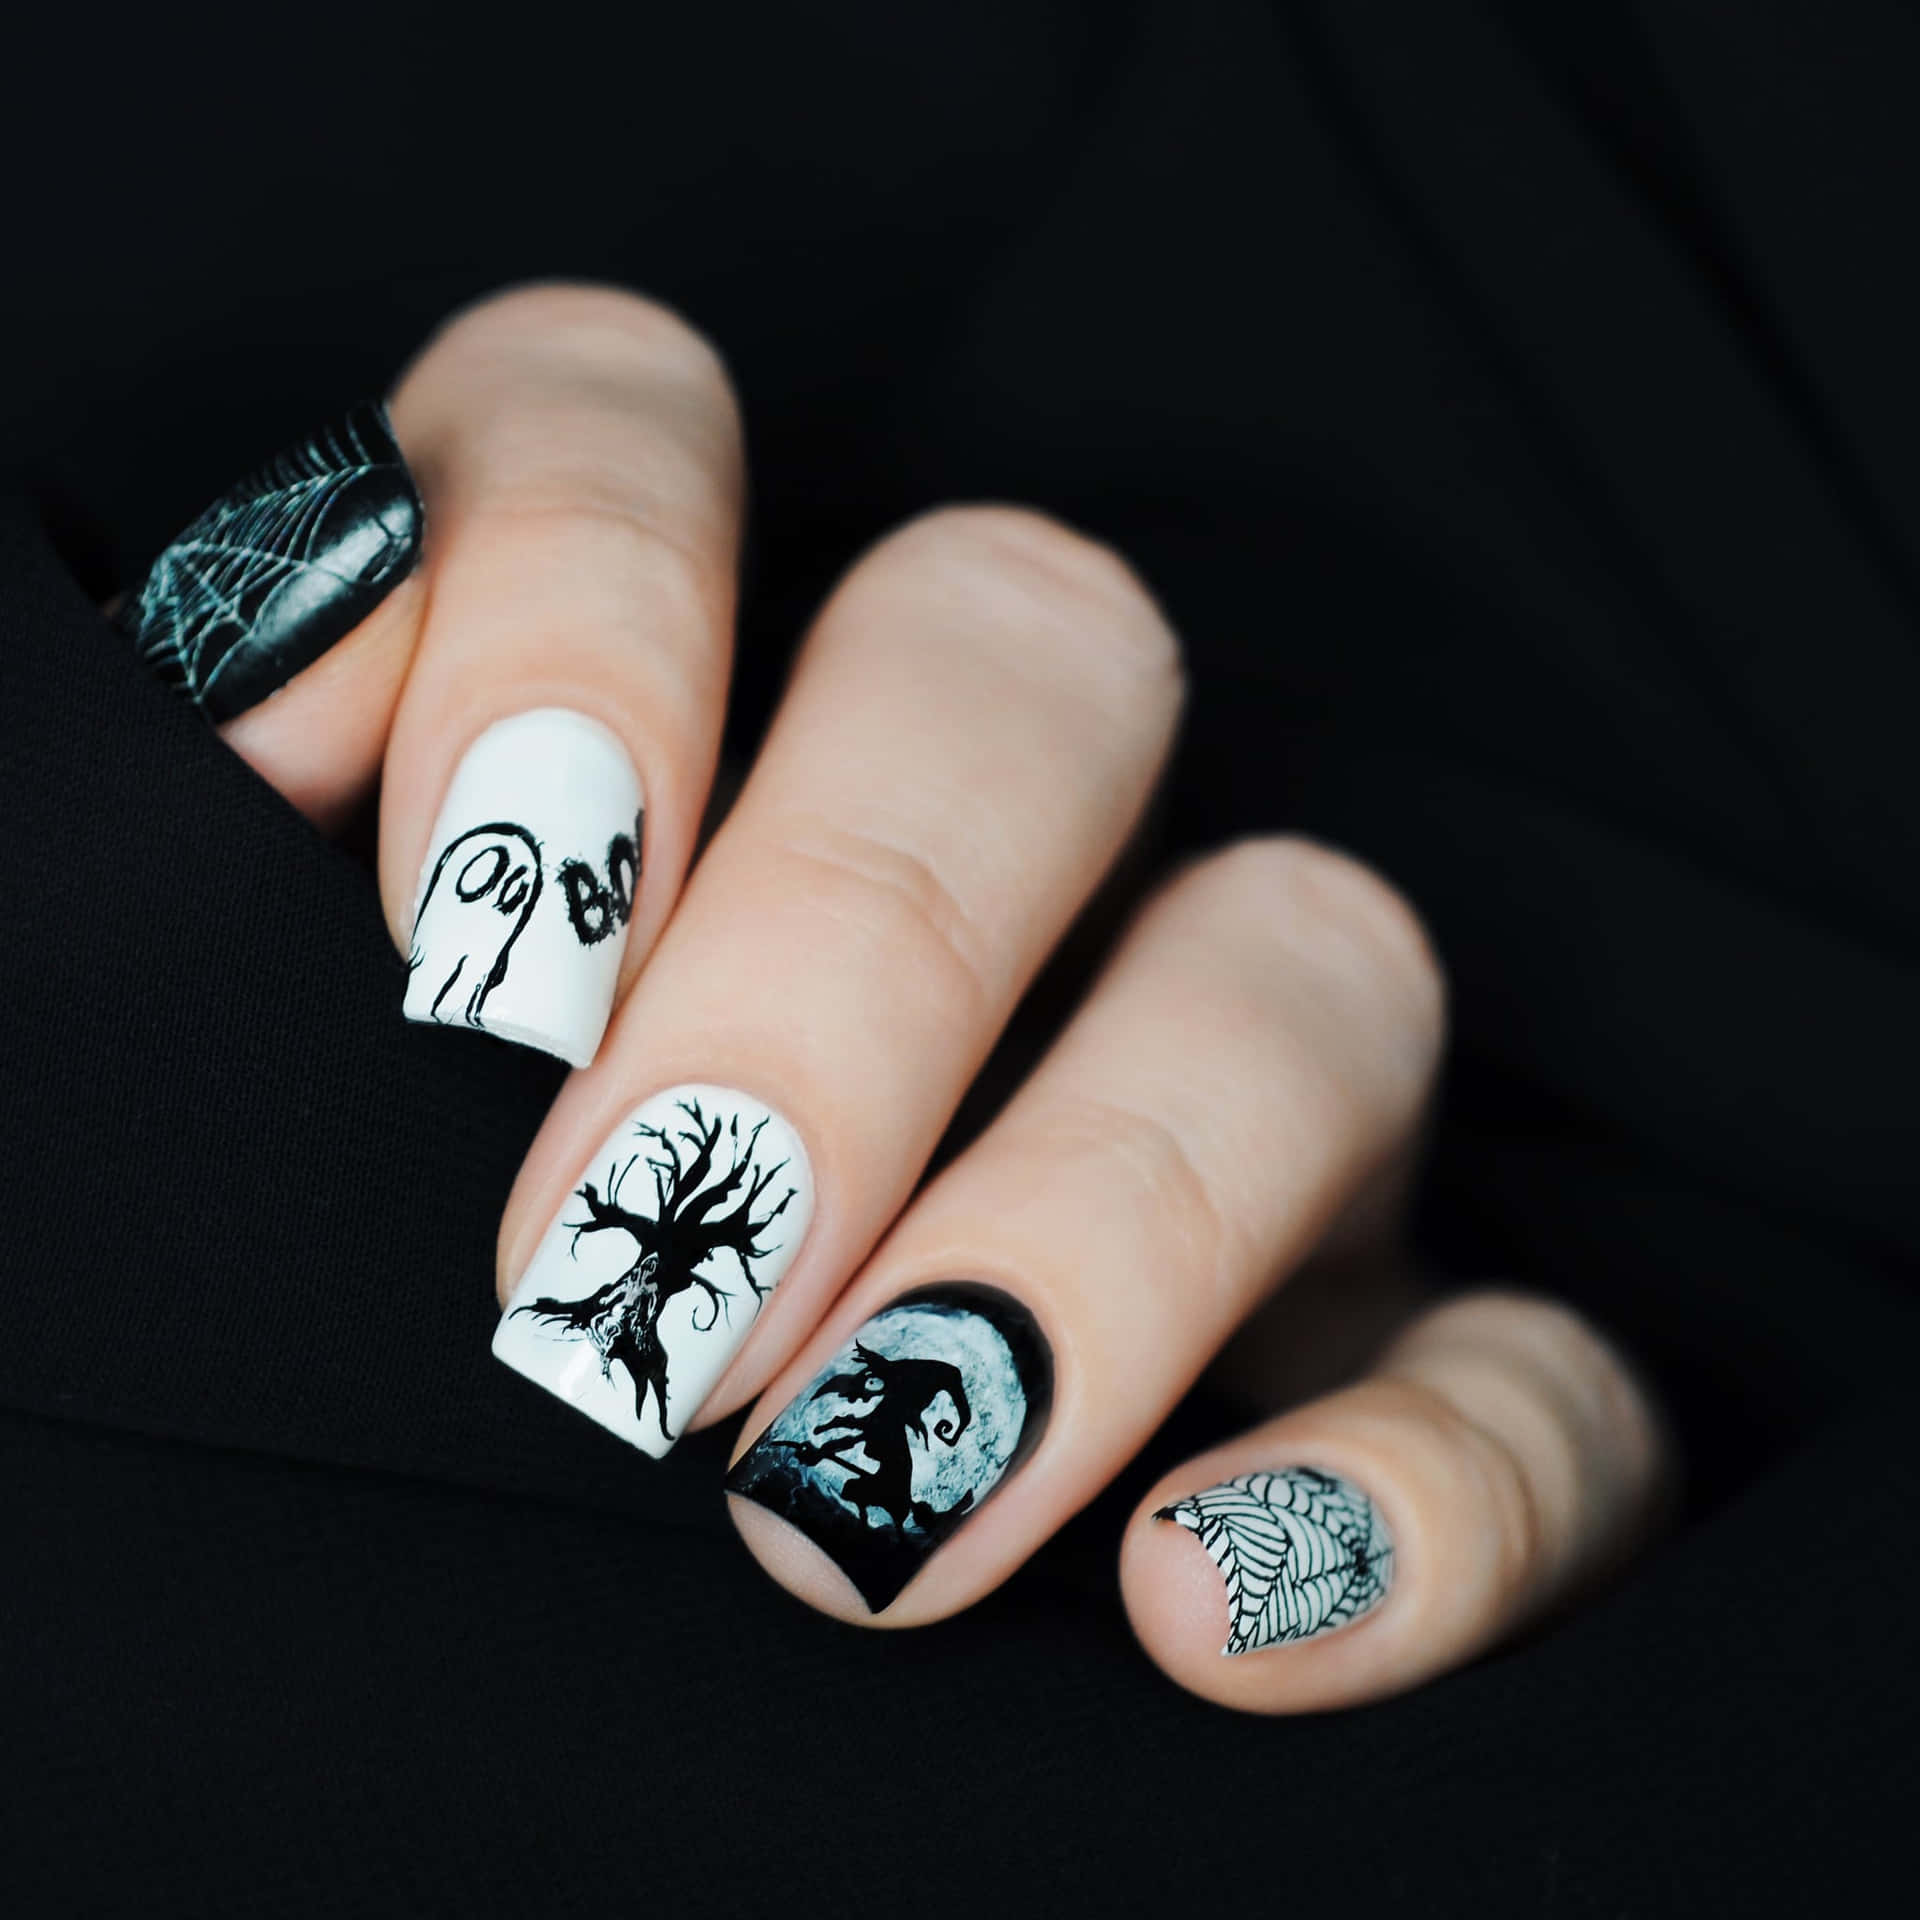 Get creative with your nails this Halloween! Wallpaper